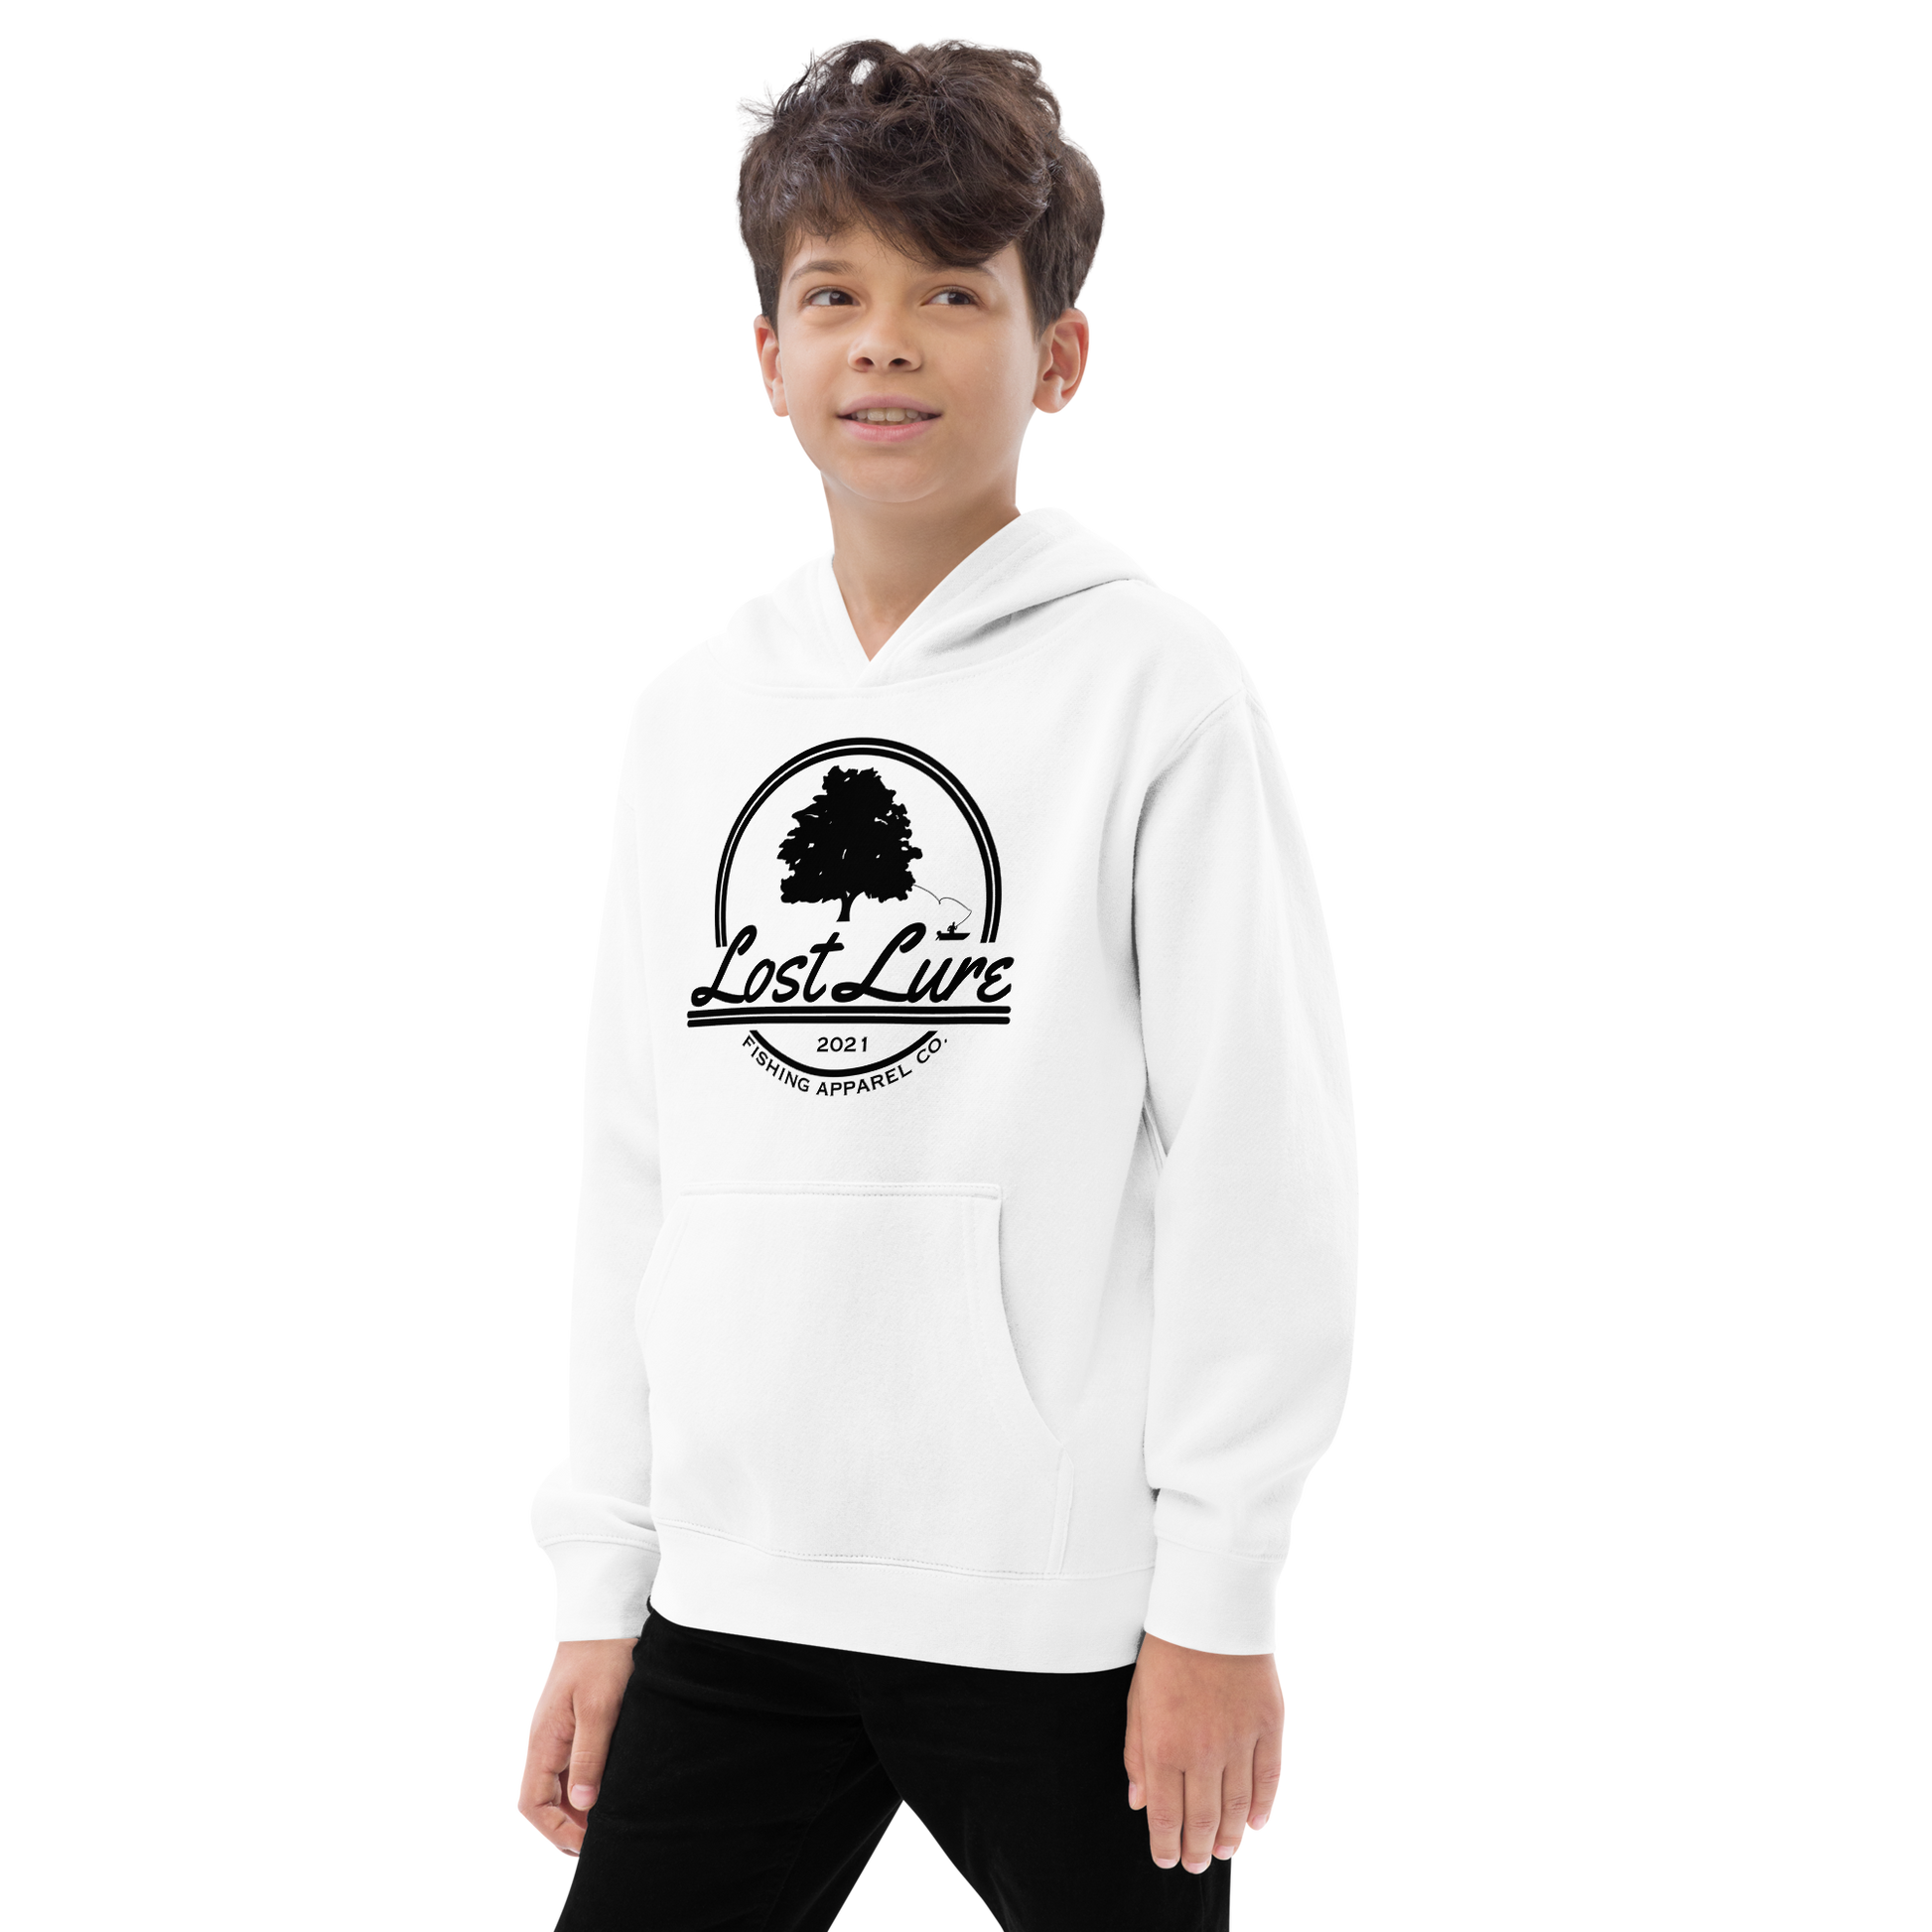 Boy wearing white Kids size fishing hoodie with lost lure logo.